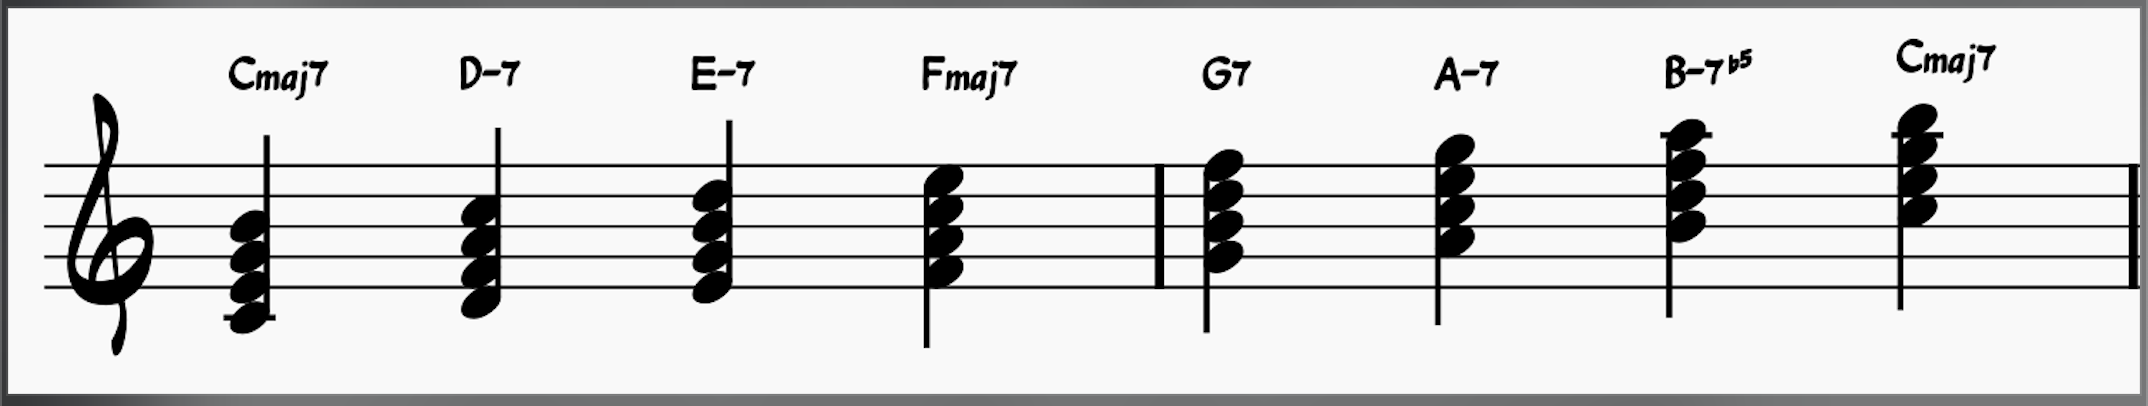 Root position C major chord scale